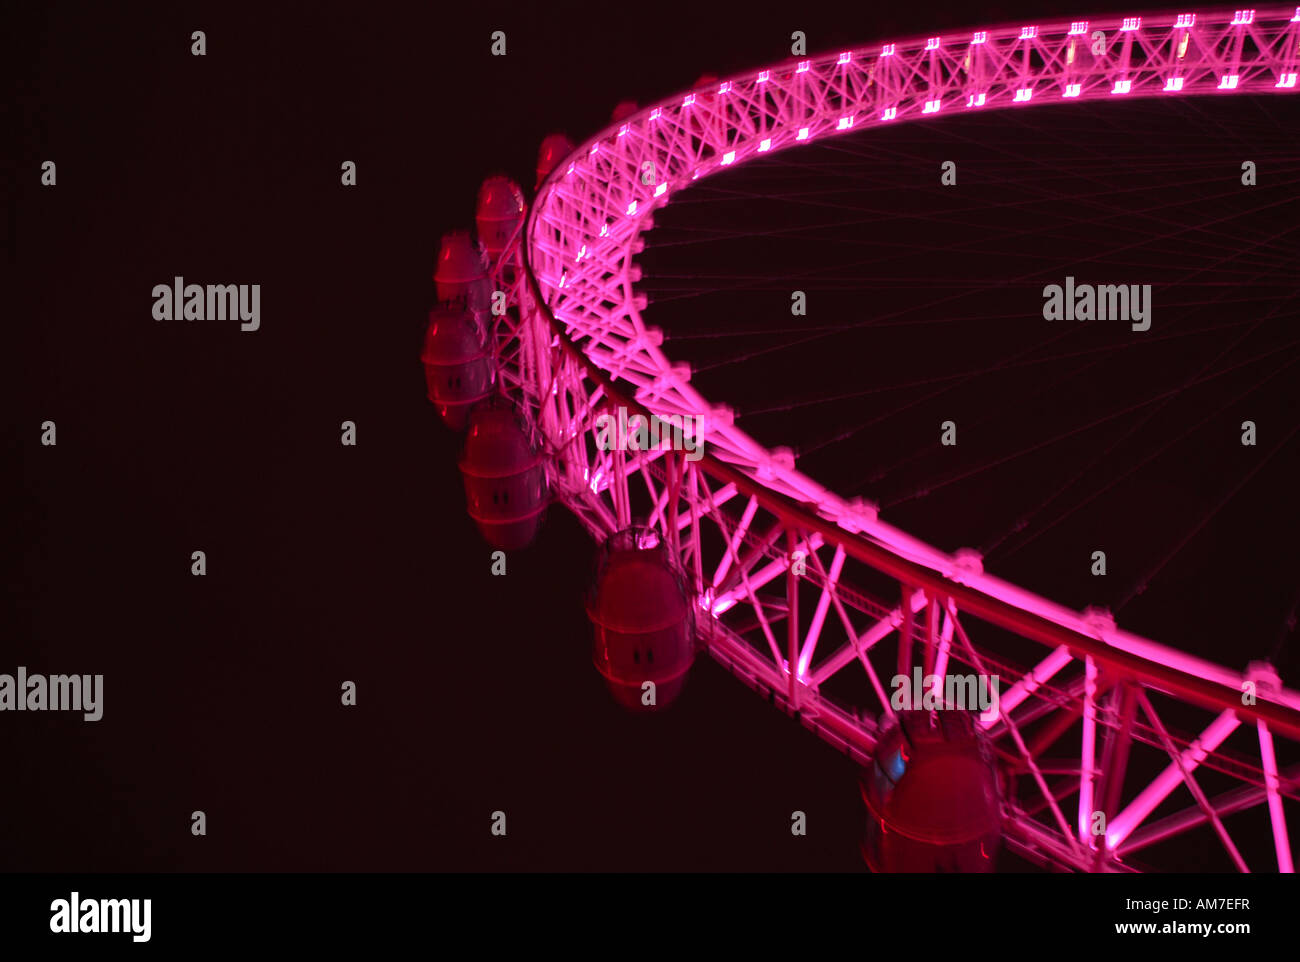 The millenium wheel at night in pink neon lights Stock Photo